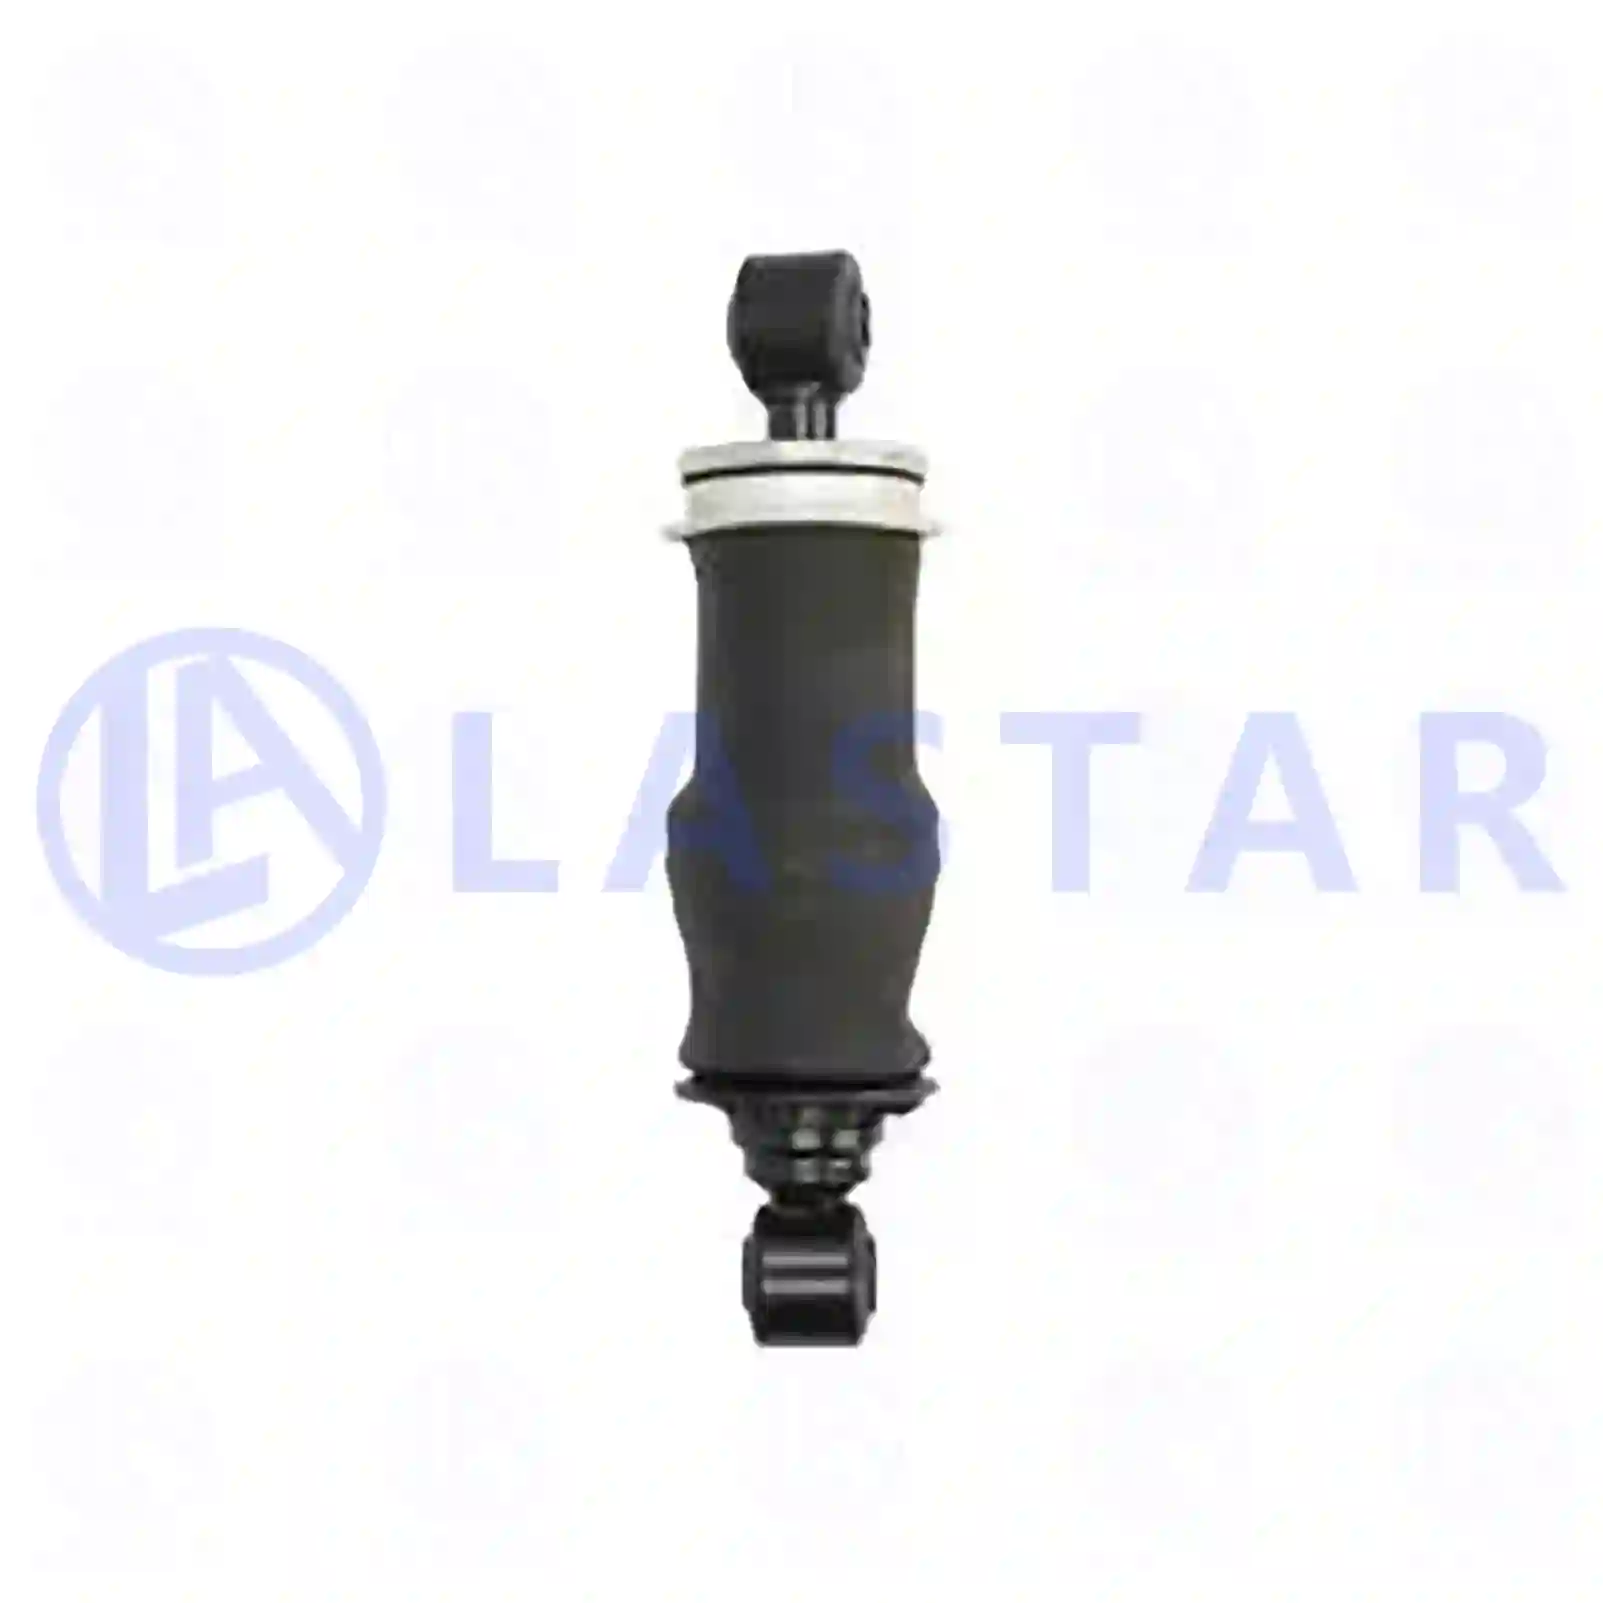 Cabin shock absorber, with air bellow, 77735593, 500340706, , , ||  77735593 Lastar Spare Part | Truck Spare Parts, Auotomotive Spare Parts Cabin shock absorber, with air bellow, 77735593, 500340706, , , ||  77735593 Lastar Spare Part | Truck Spare Parts, Auotomotive Spare Parts